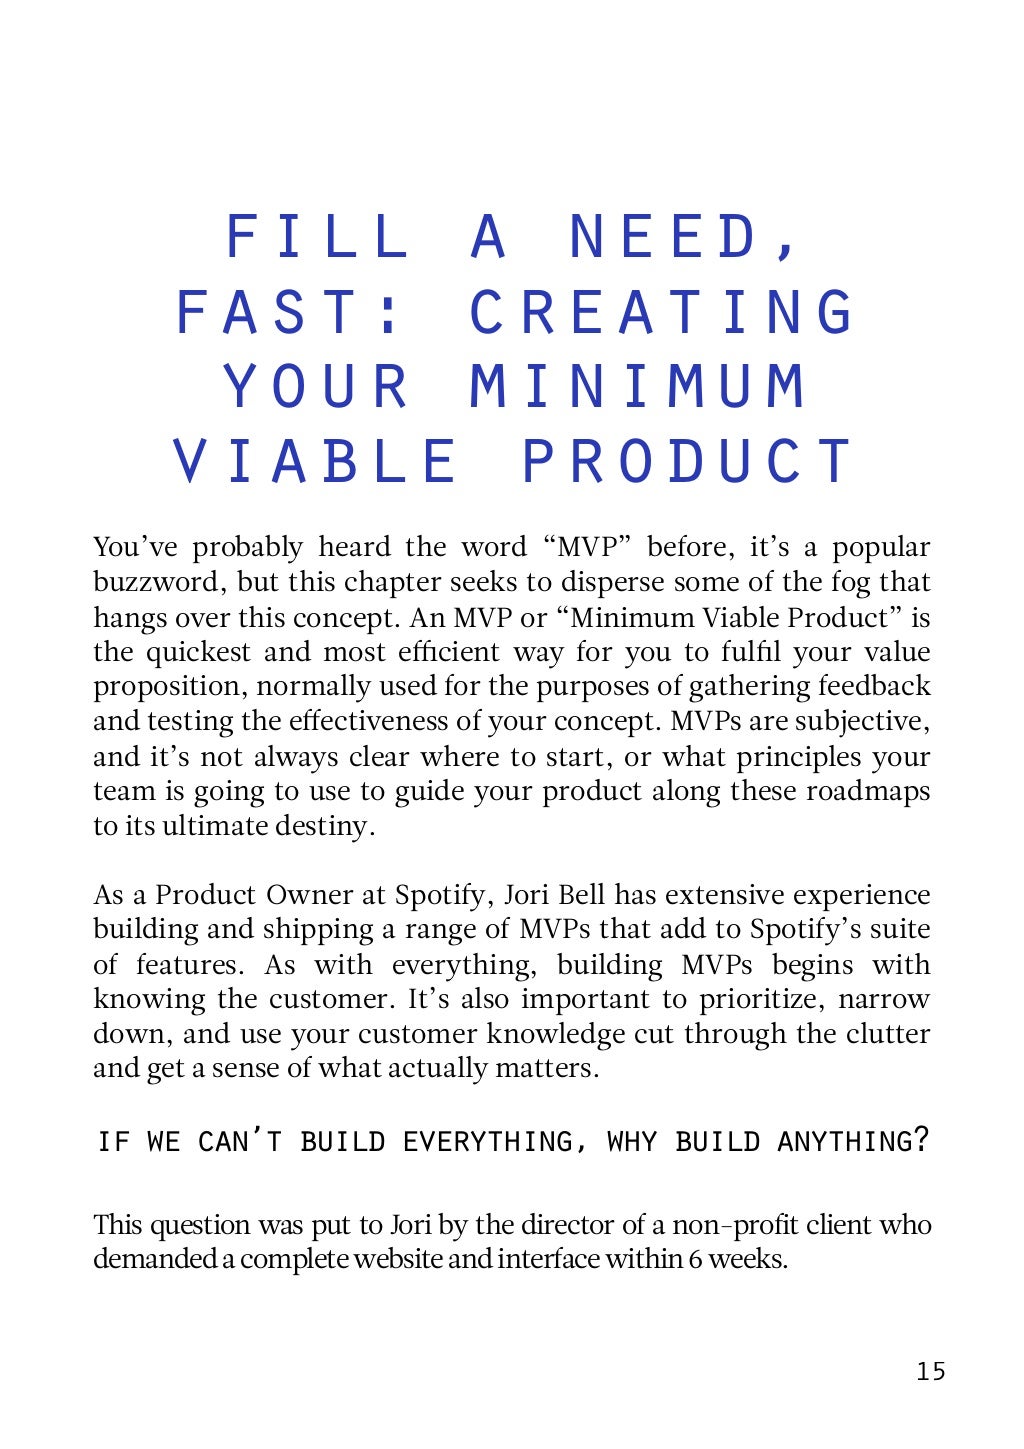 Product Mindset page 20